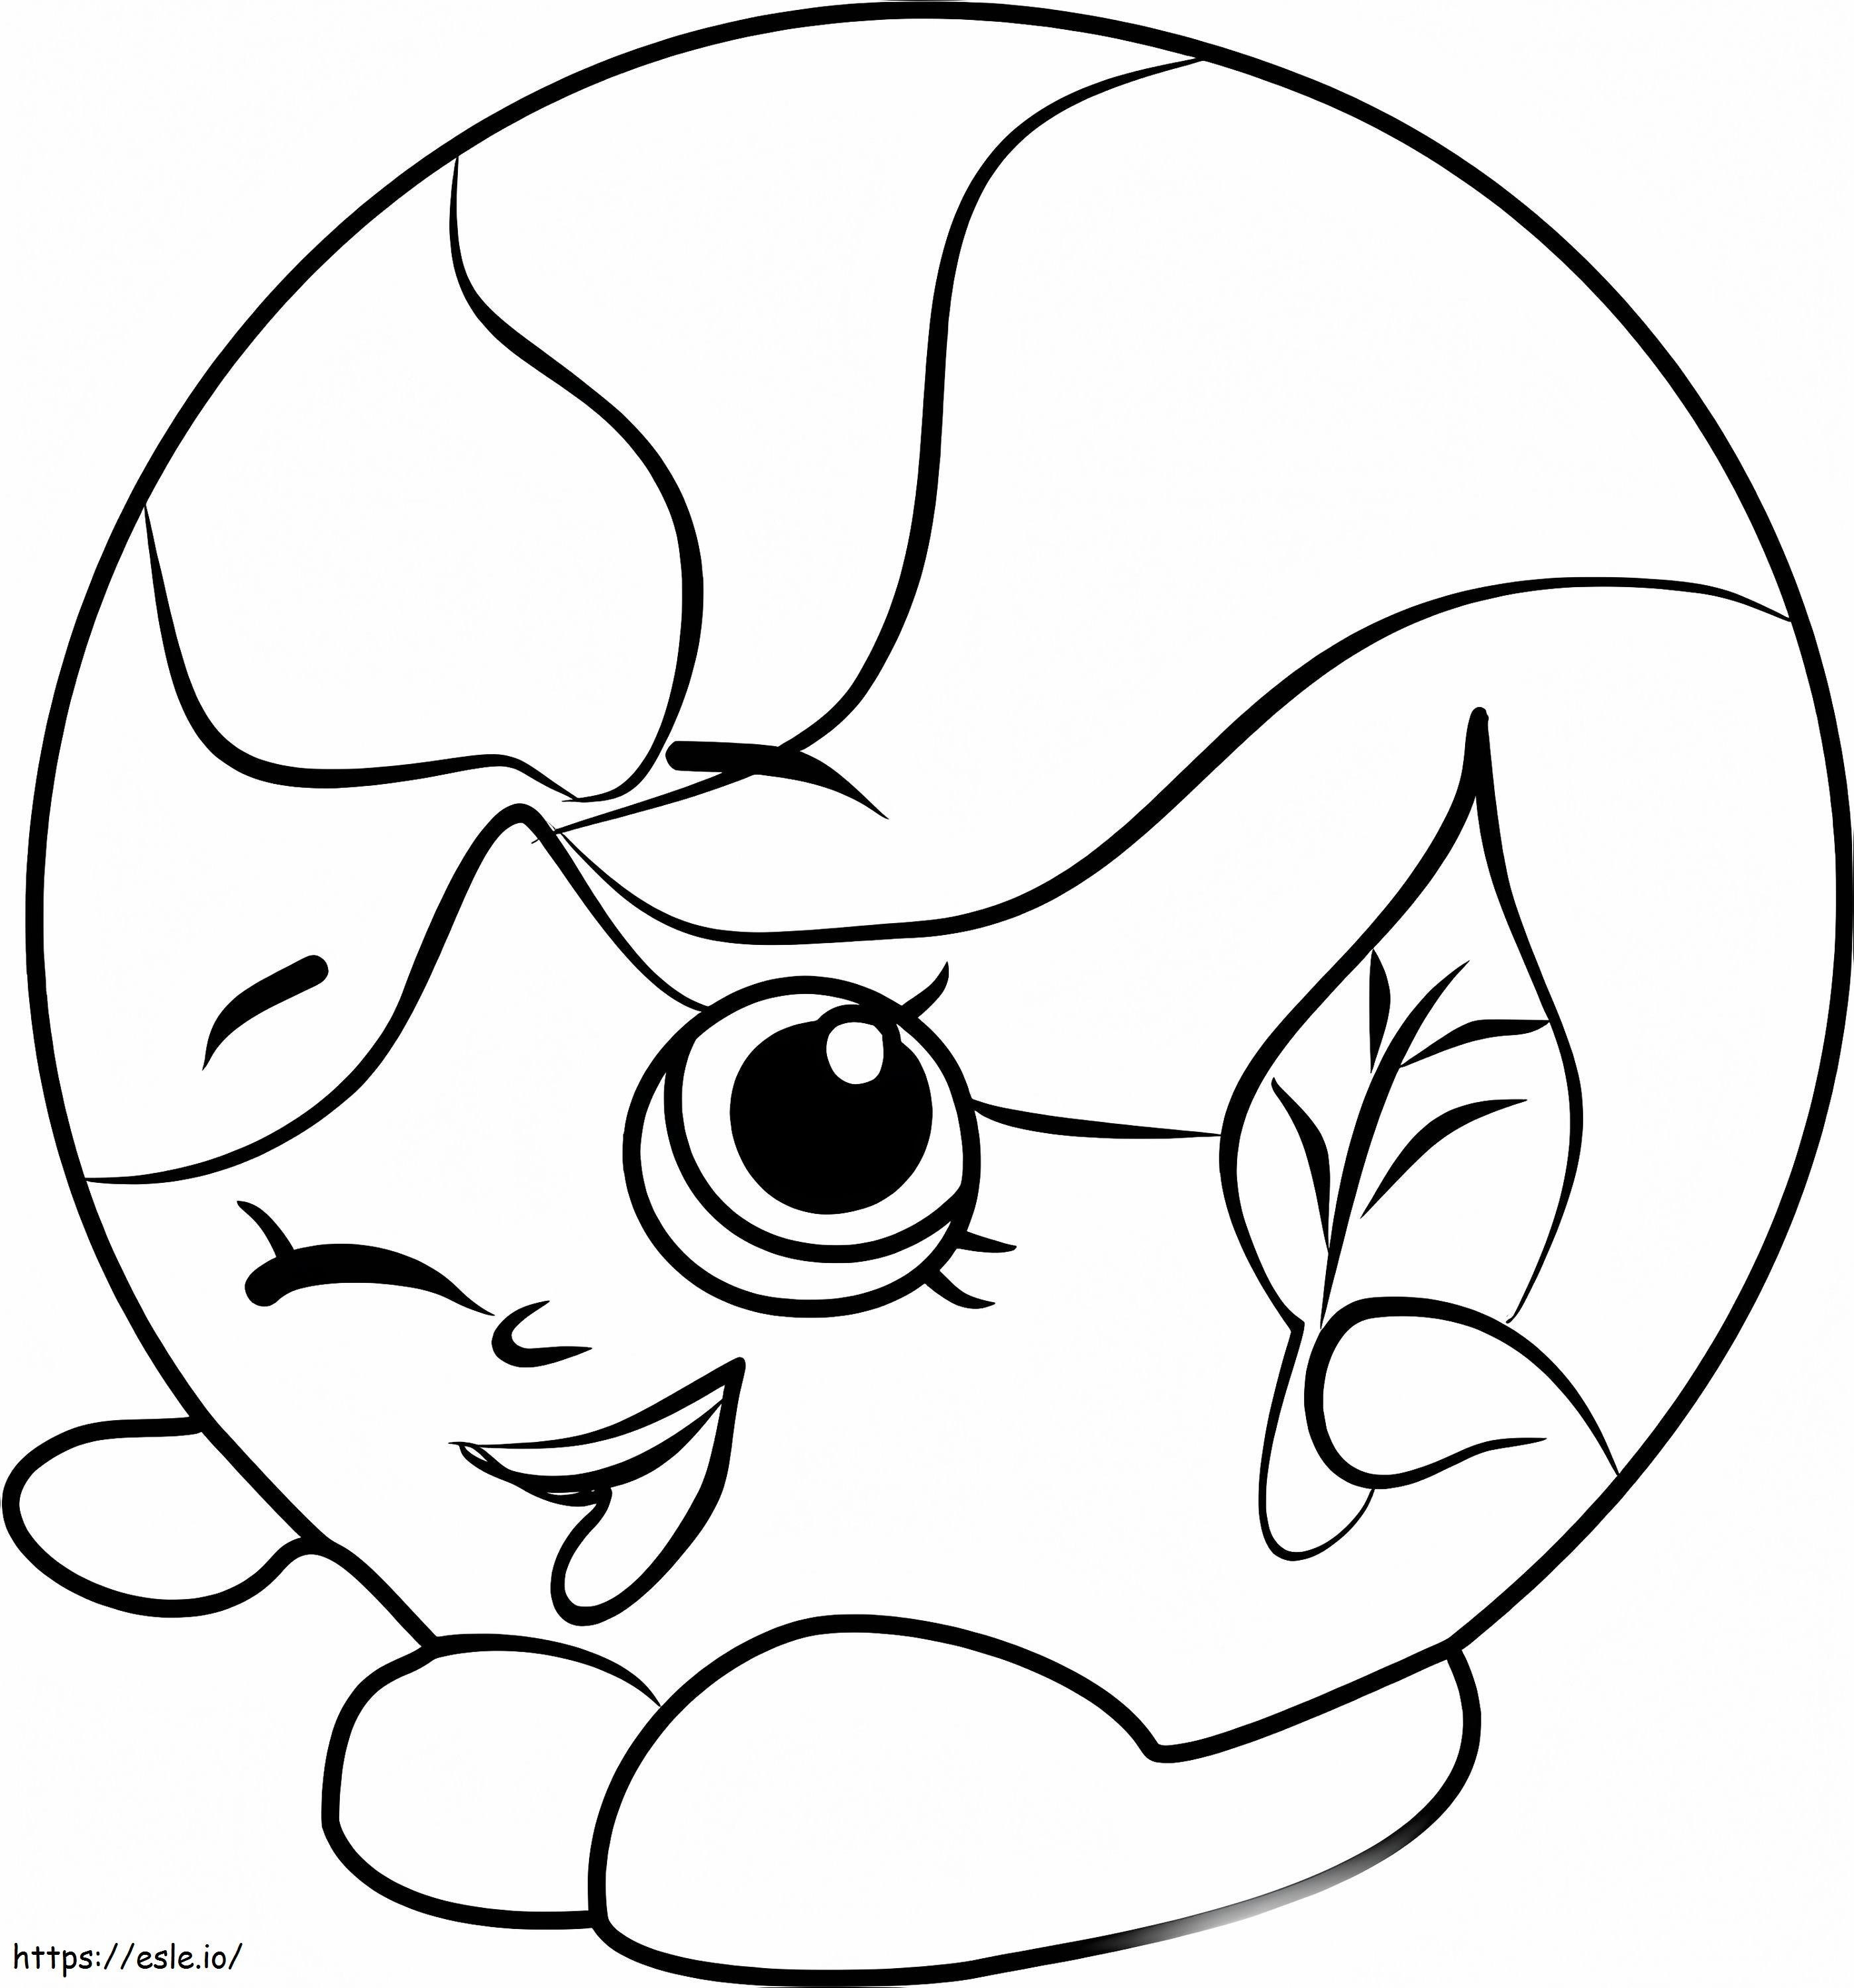 Minnie Mintie Shopkins coloring page